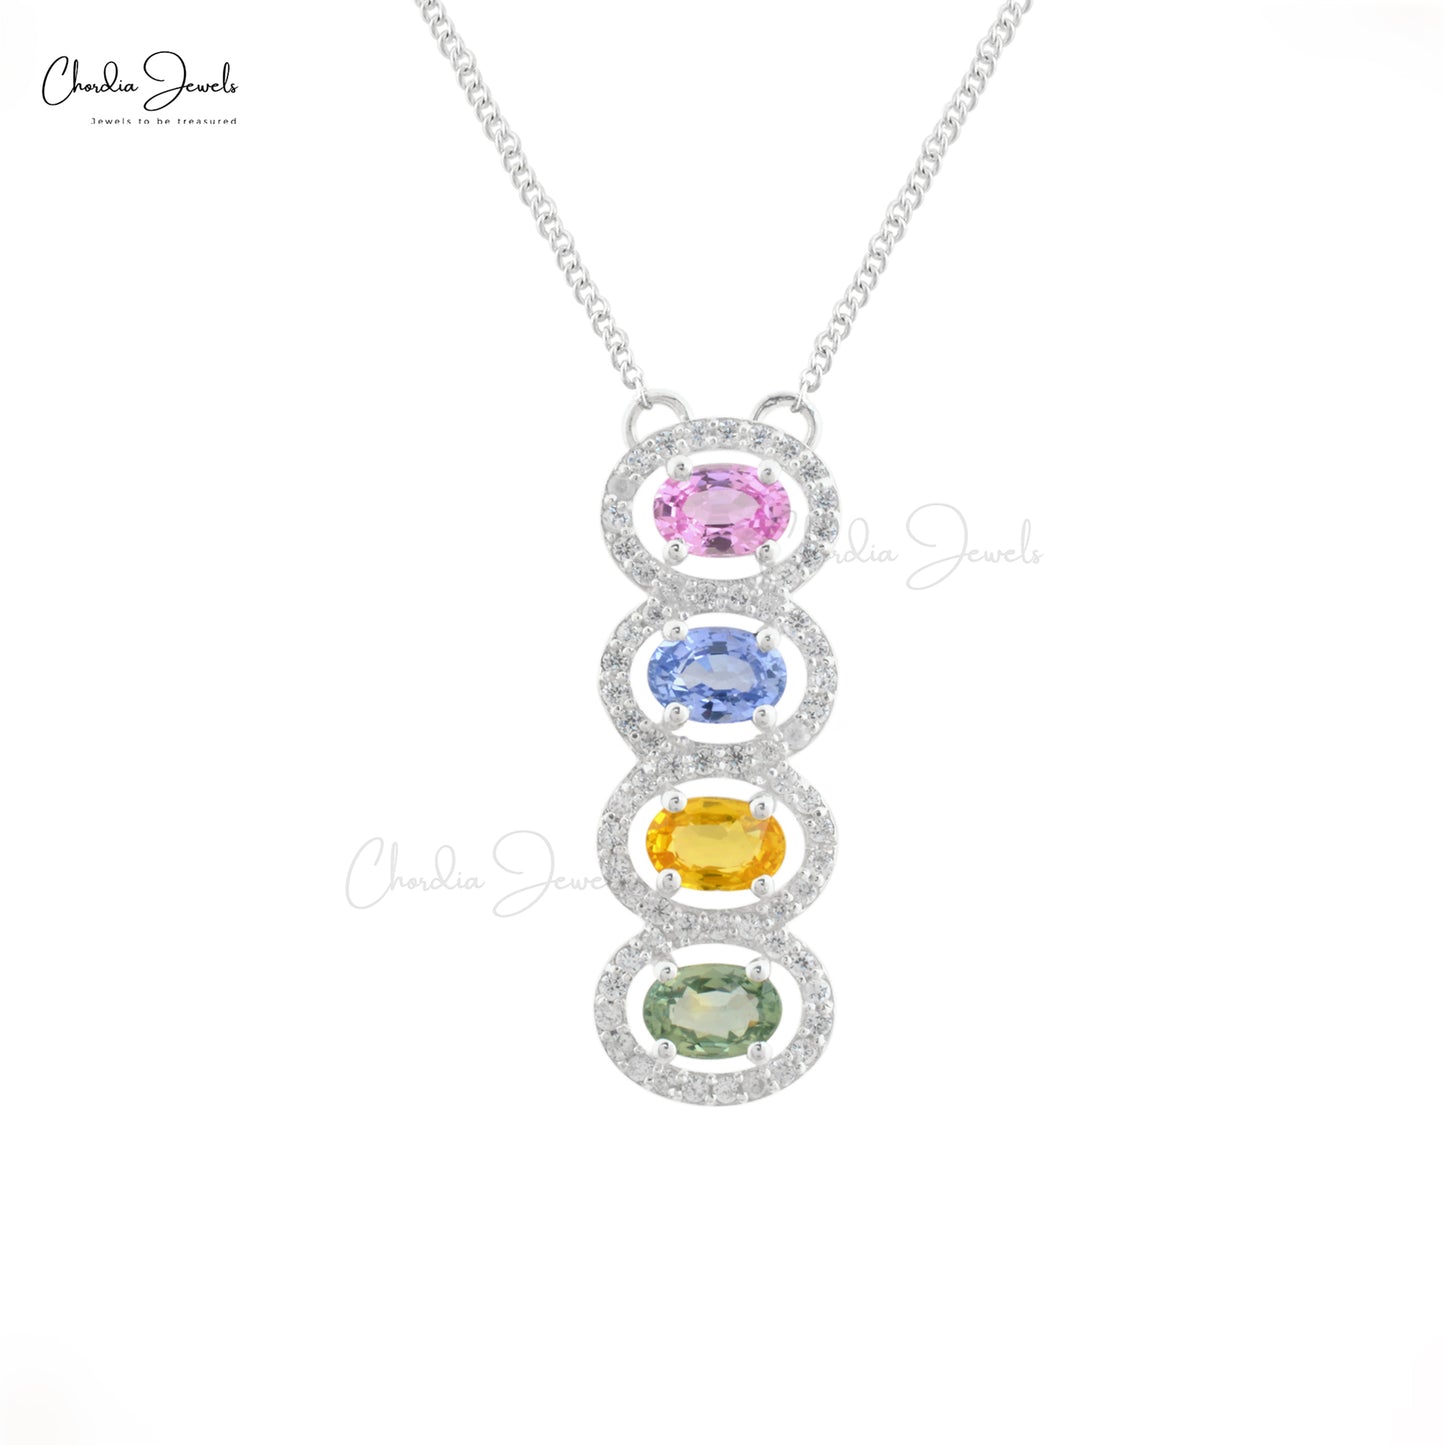 Hot selling 925 Sterling Silver Jewelry Genuine Multi Sapphire Pendant Cubic Zircon Pave Set Jewelry At Discount Price